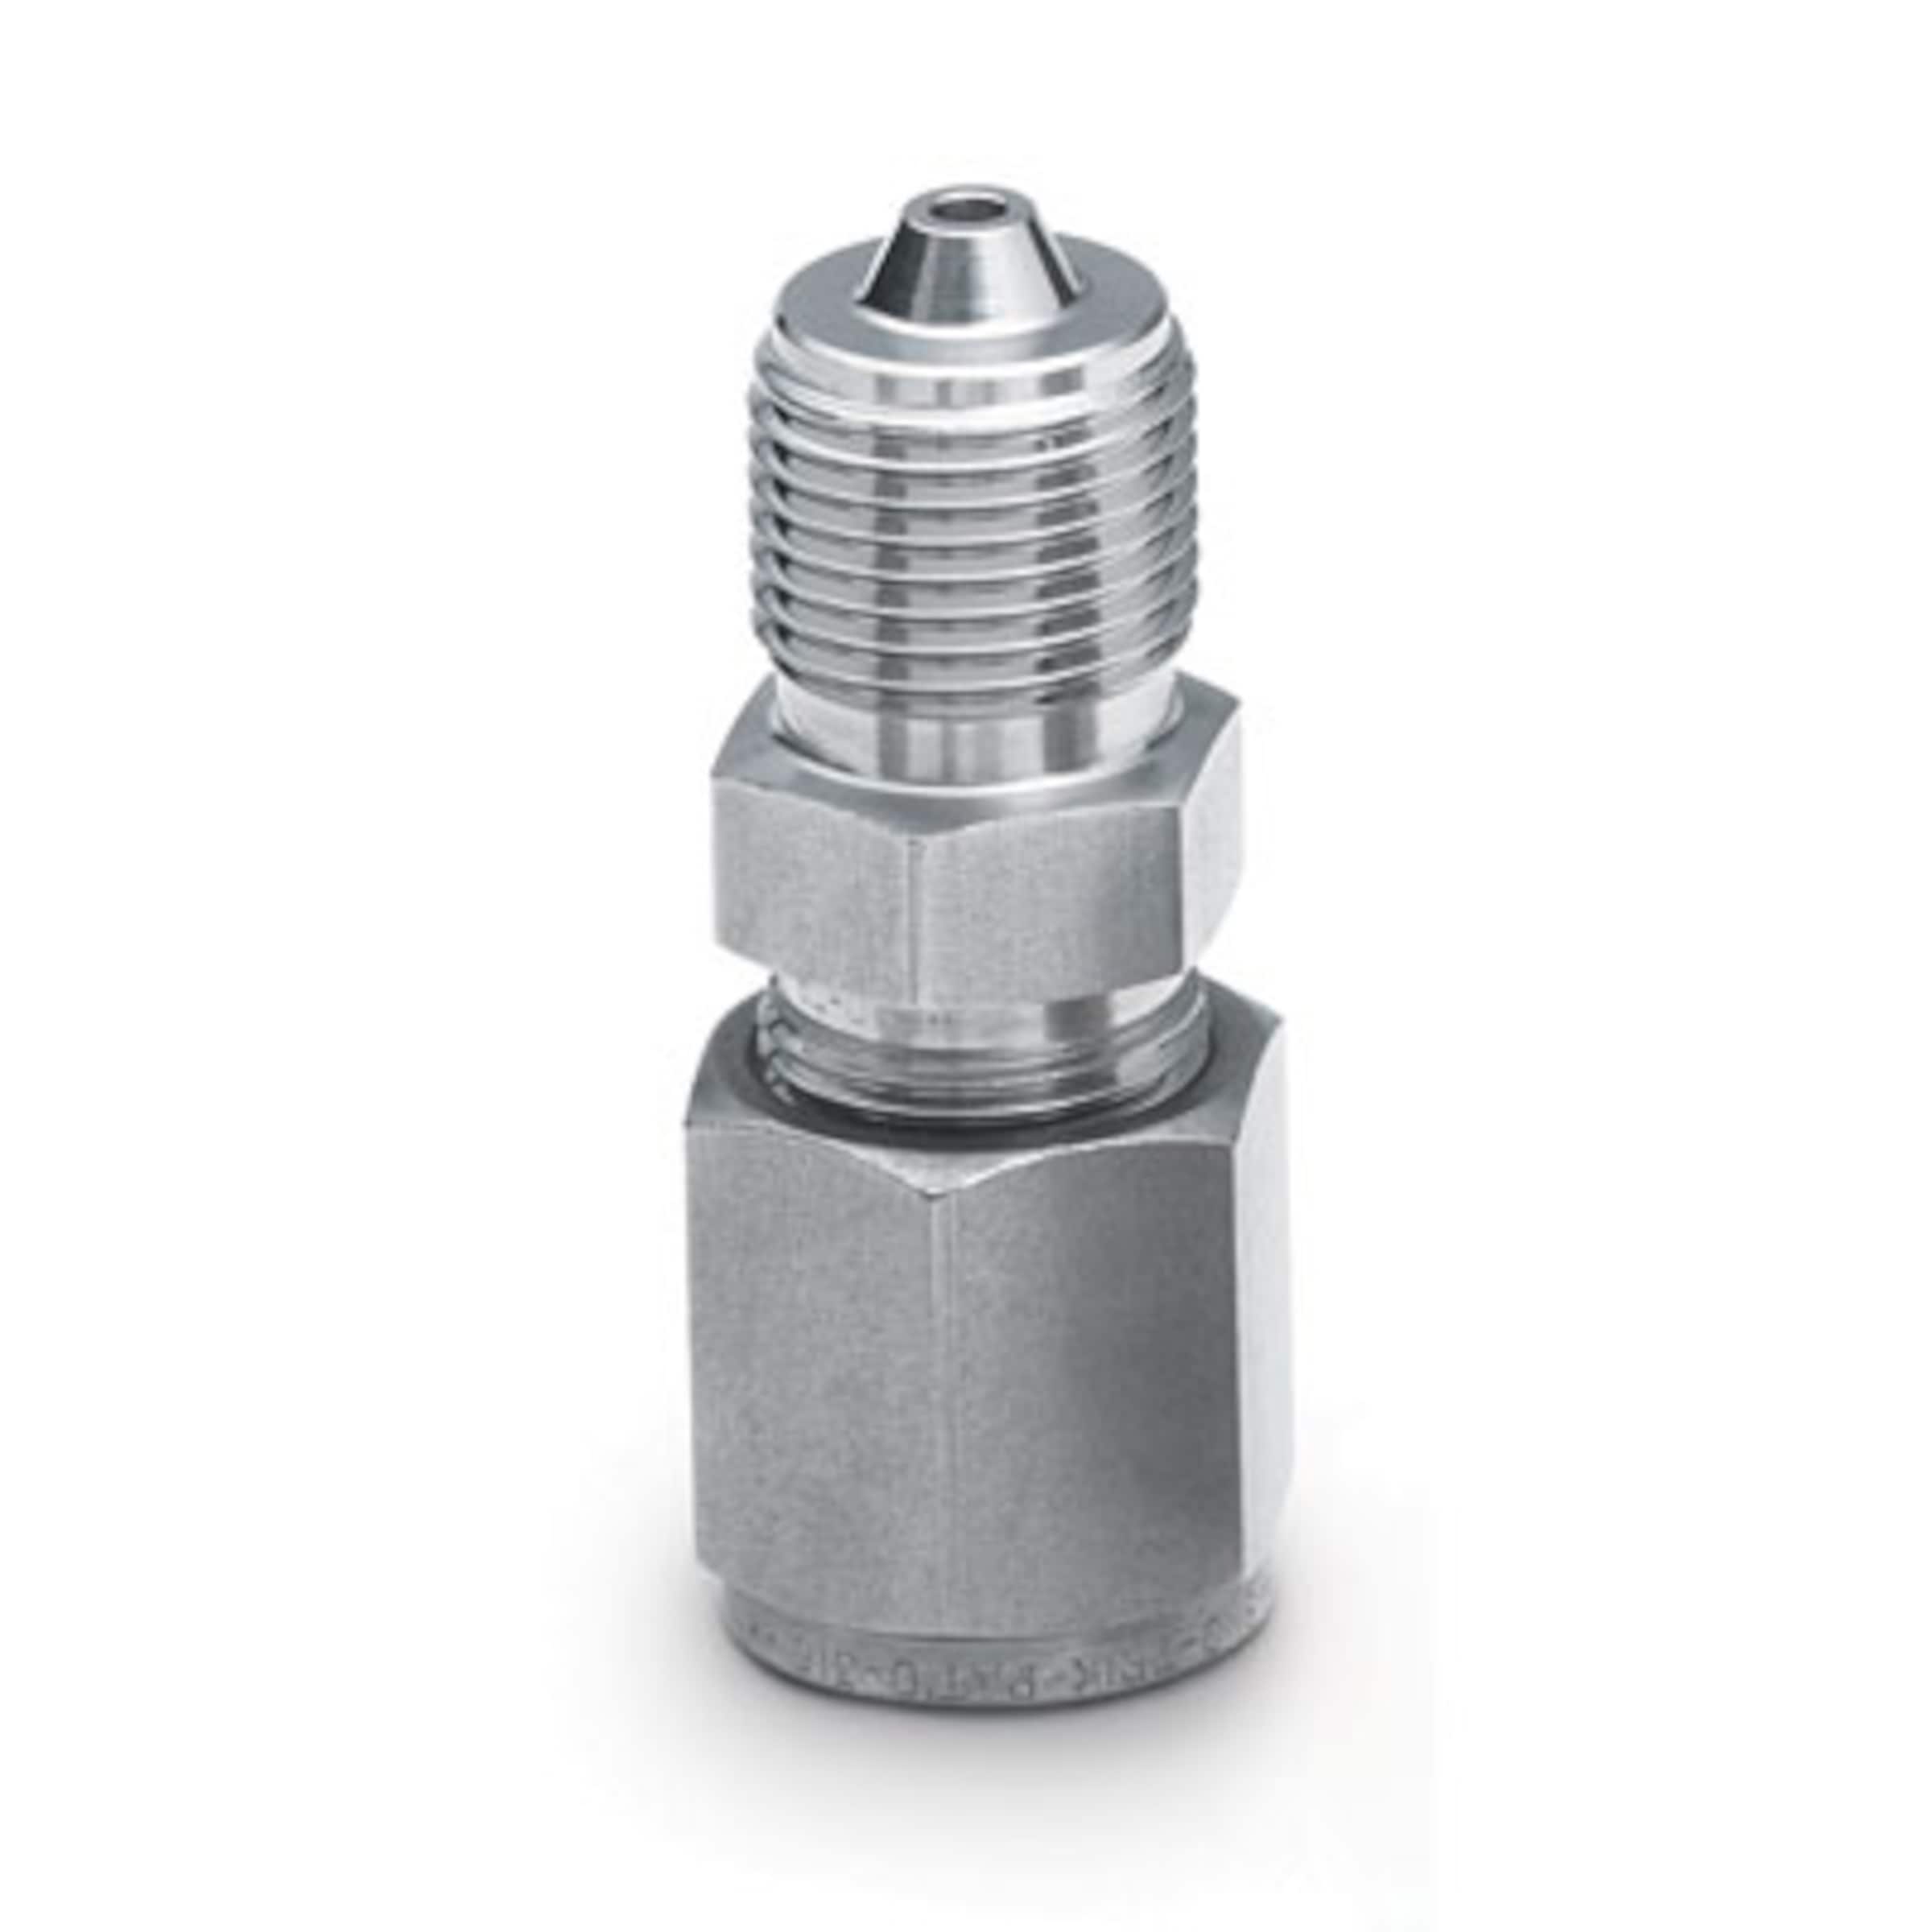 316 Stainless Steel High Pressure Fitting, 9/16-18 High Pressure